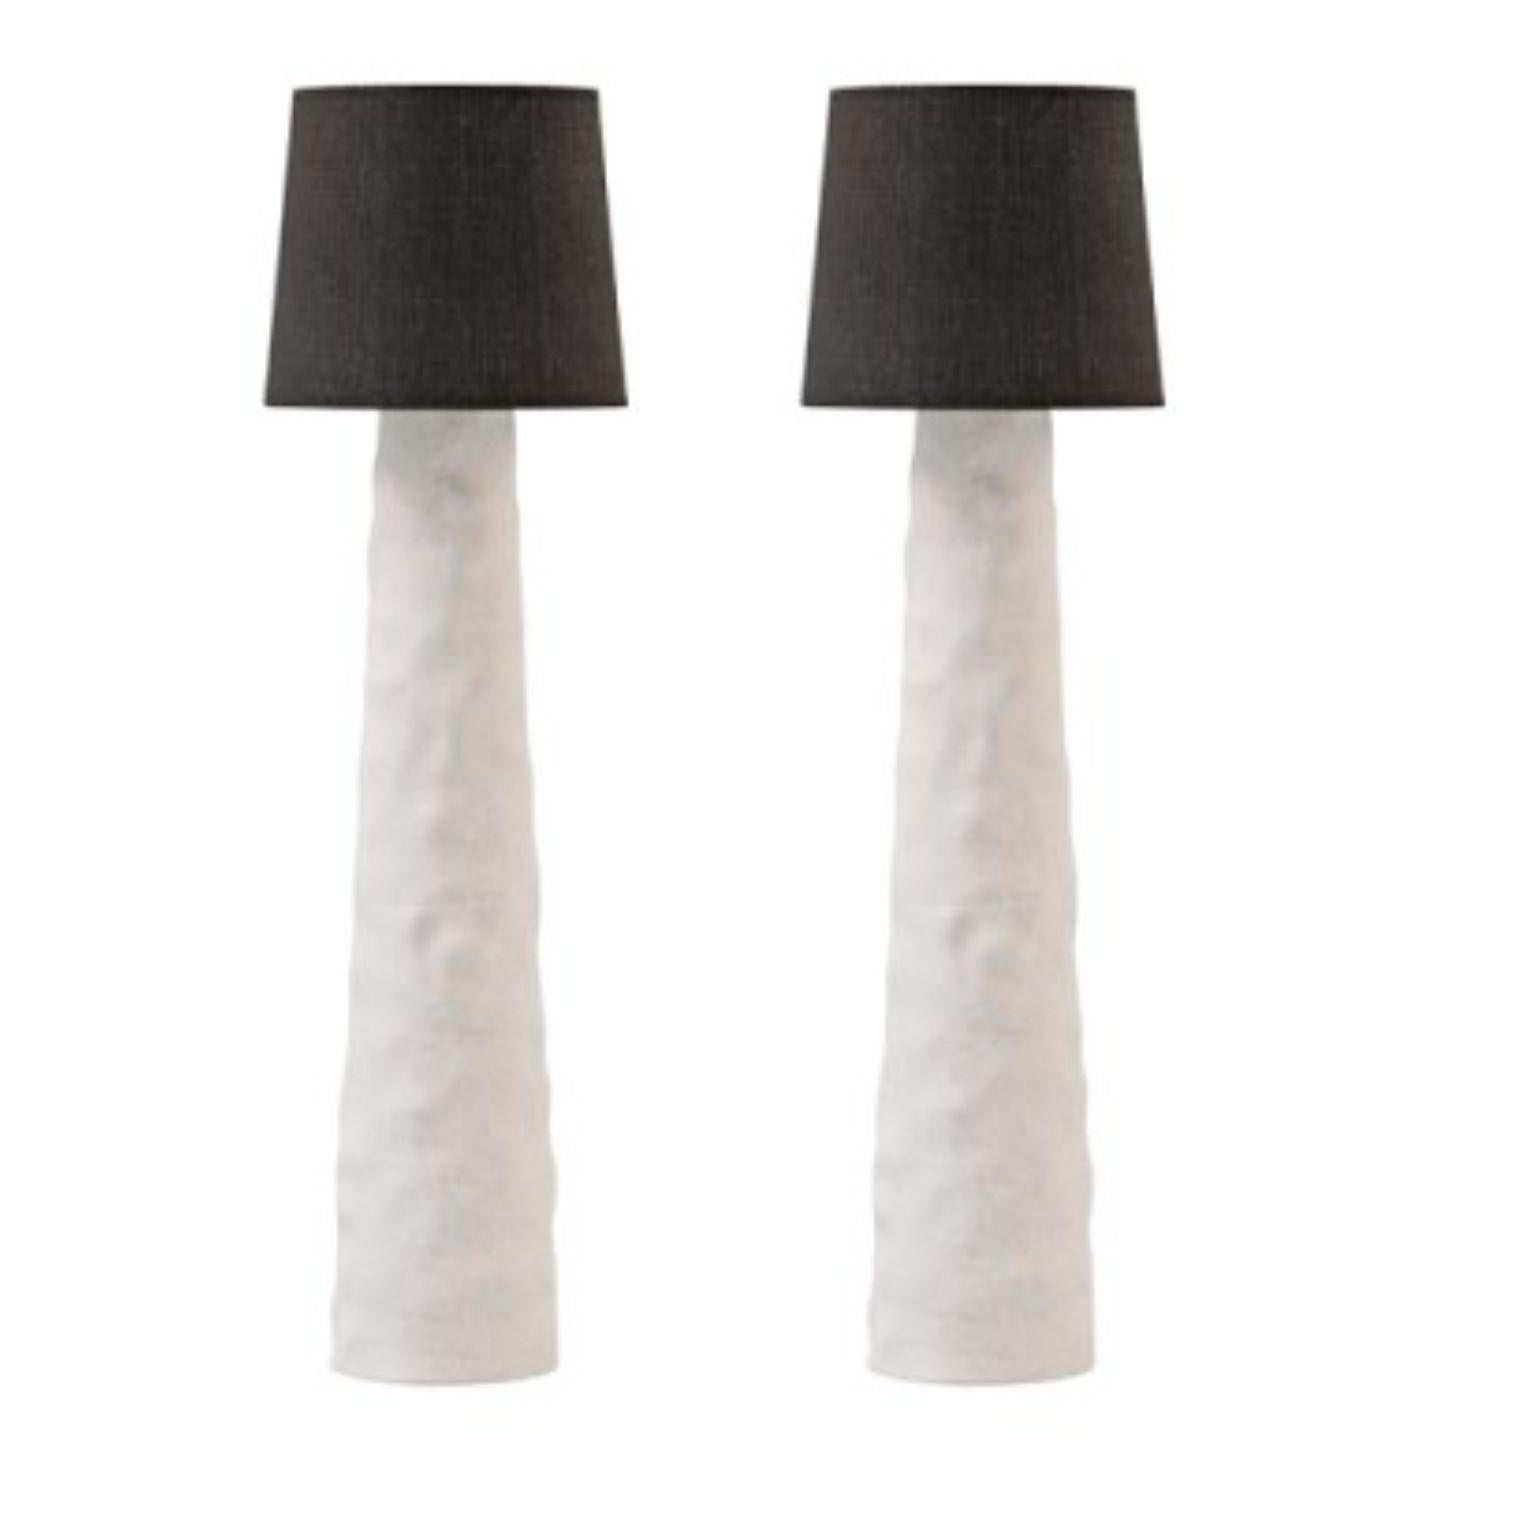 Set of 2 sculpted clay floor lamps by FAINA
Design: Victoriya Yakusha
Material: clay, wood (ash)
Dimensions: 170 x 50 x 50 cm
Weight: 63 kilos.

*All our lamps can be wired according to each country. If sold to the USA it will be wired for the